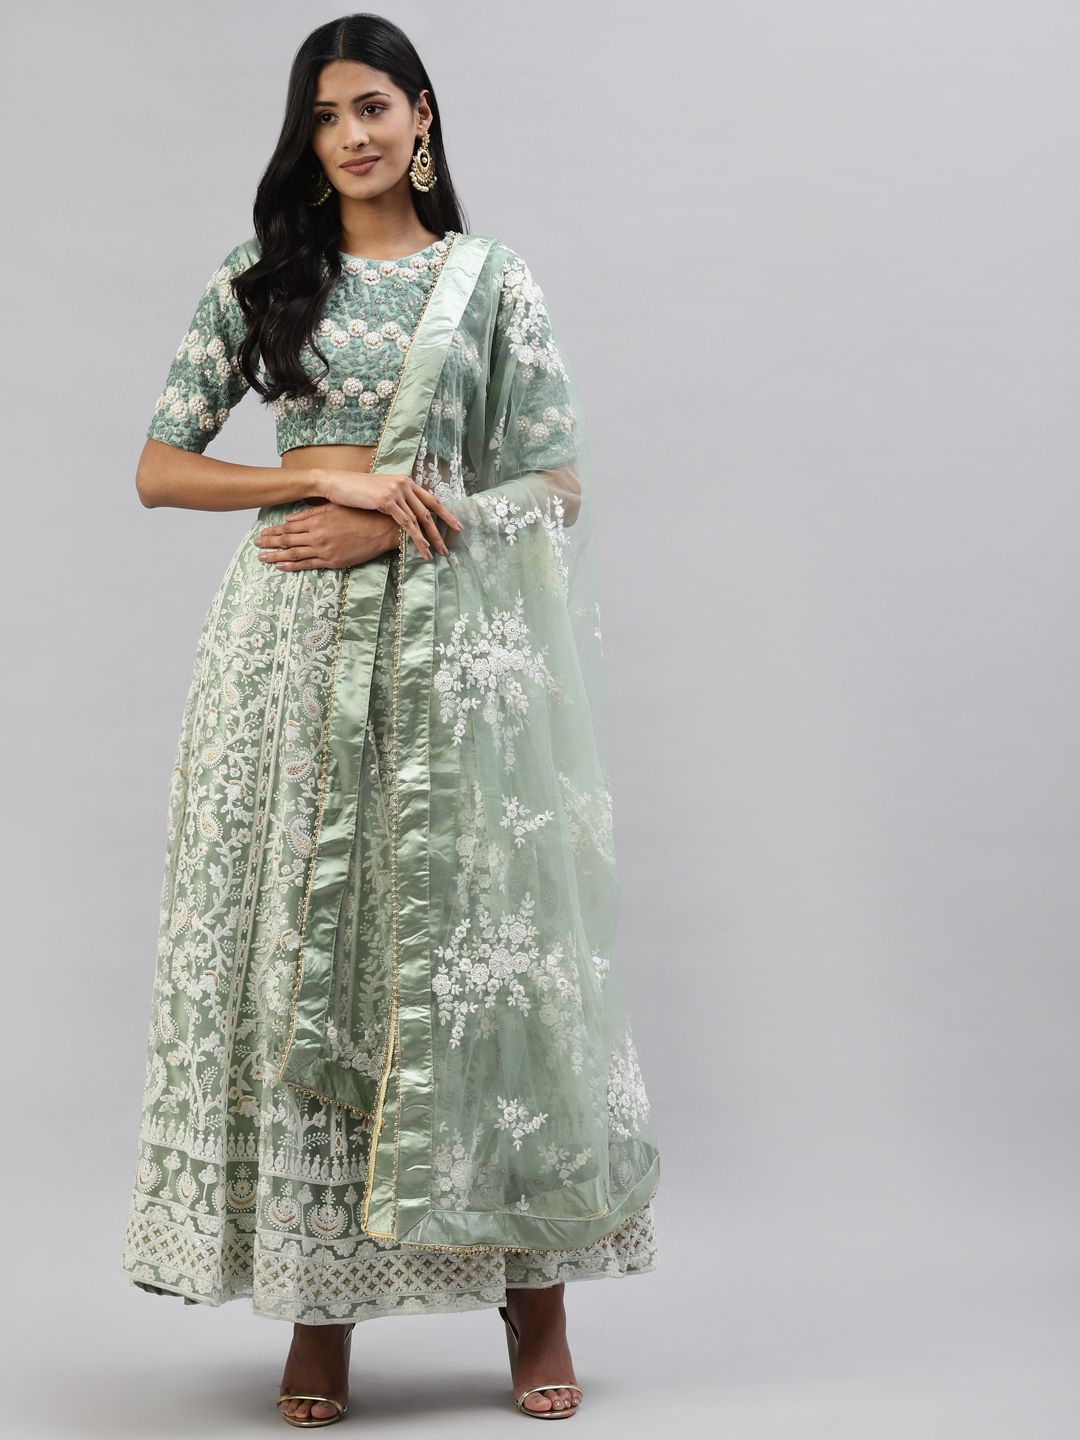 Readiprint Fashions Green Semi-Stitched Lehenga & Unstitched Blouse With Dupatta Price in India